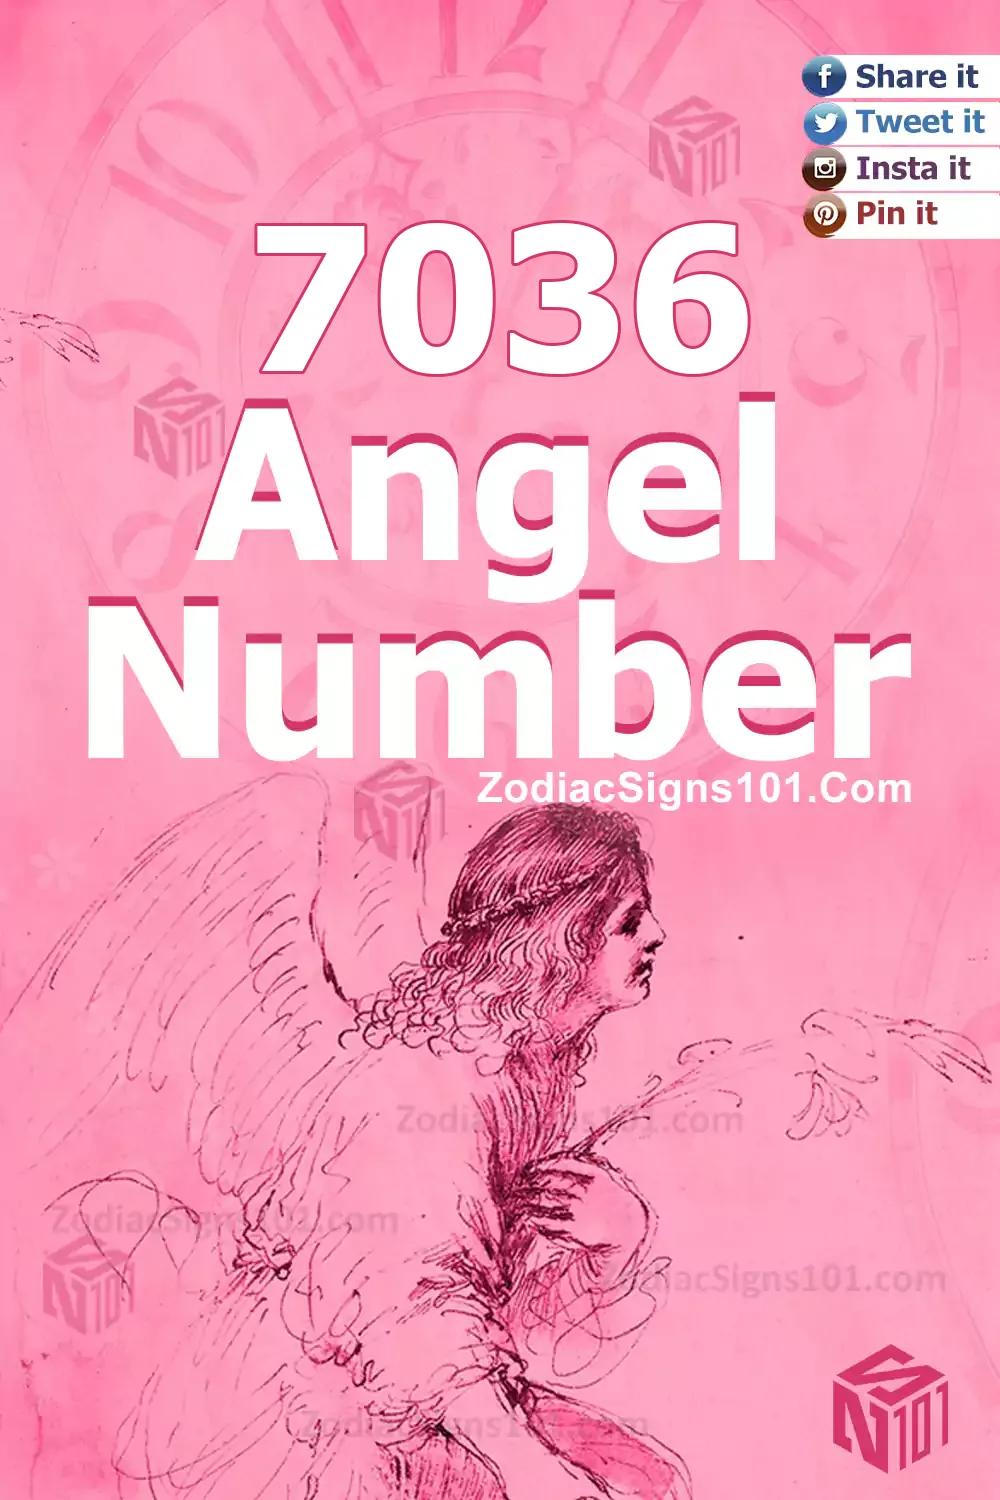 7036 Angel Number Meaning